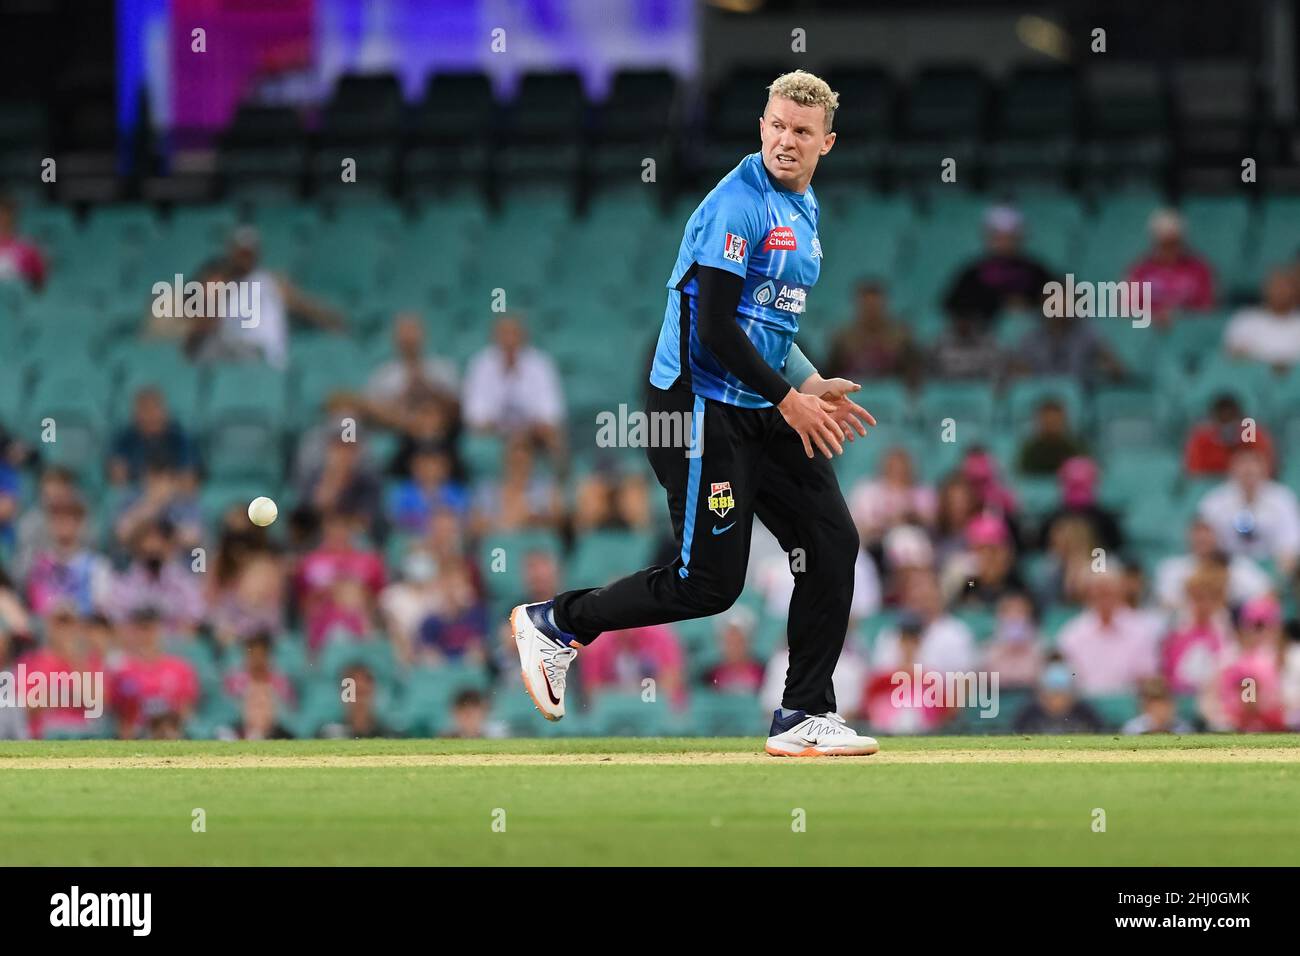 Sydney, Australia, 26 January, 2022. Peter Siddle of the Strikers bowls during the Big Bash League Challenger cricket match between Sydney Sixers and Adelaide Strikers at The Sydney Cricket Ground on January 26, 2022 in Sydney, Australia. Credit: Steven Markham/Speed Media/Alamy Live News Stock Photo